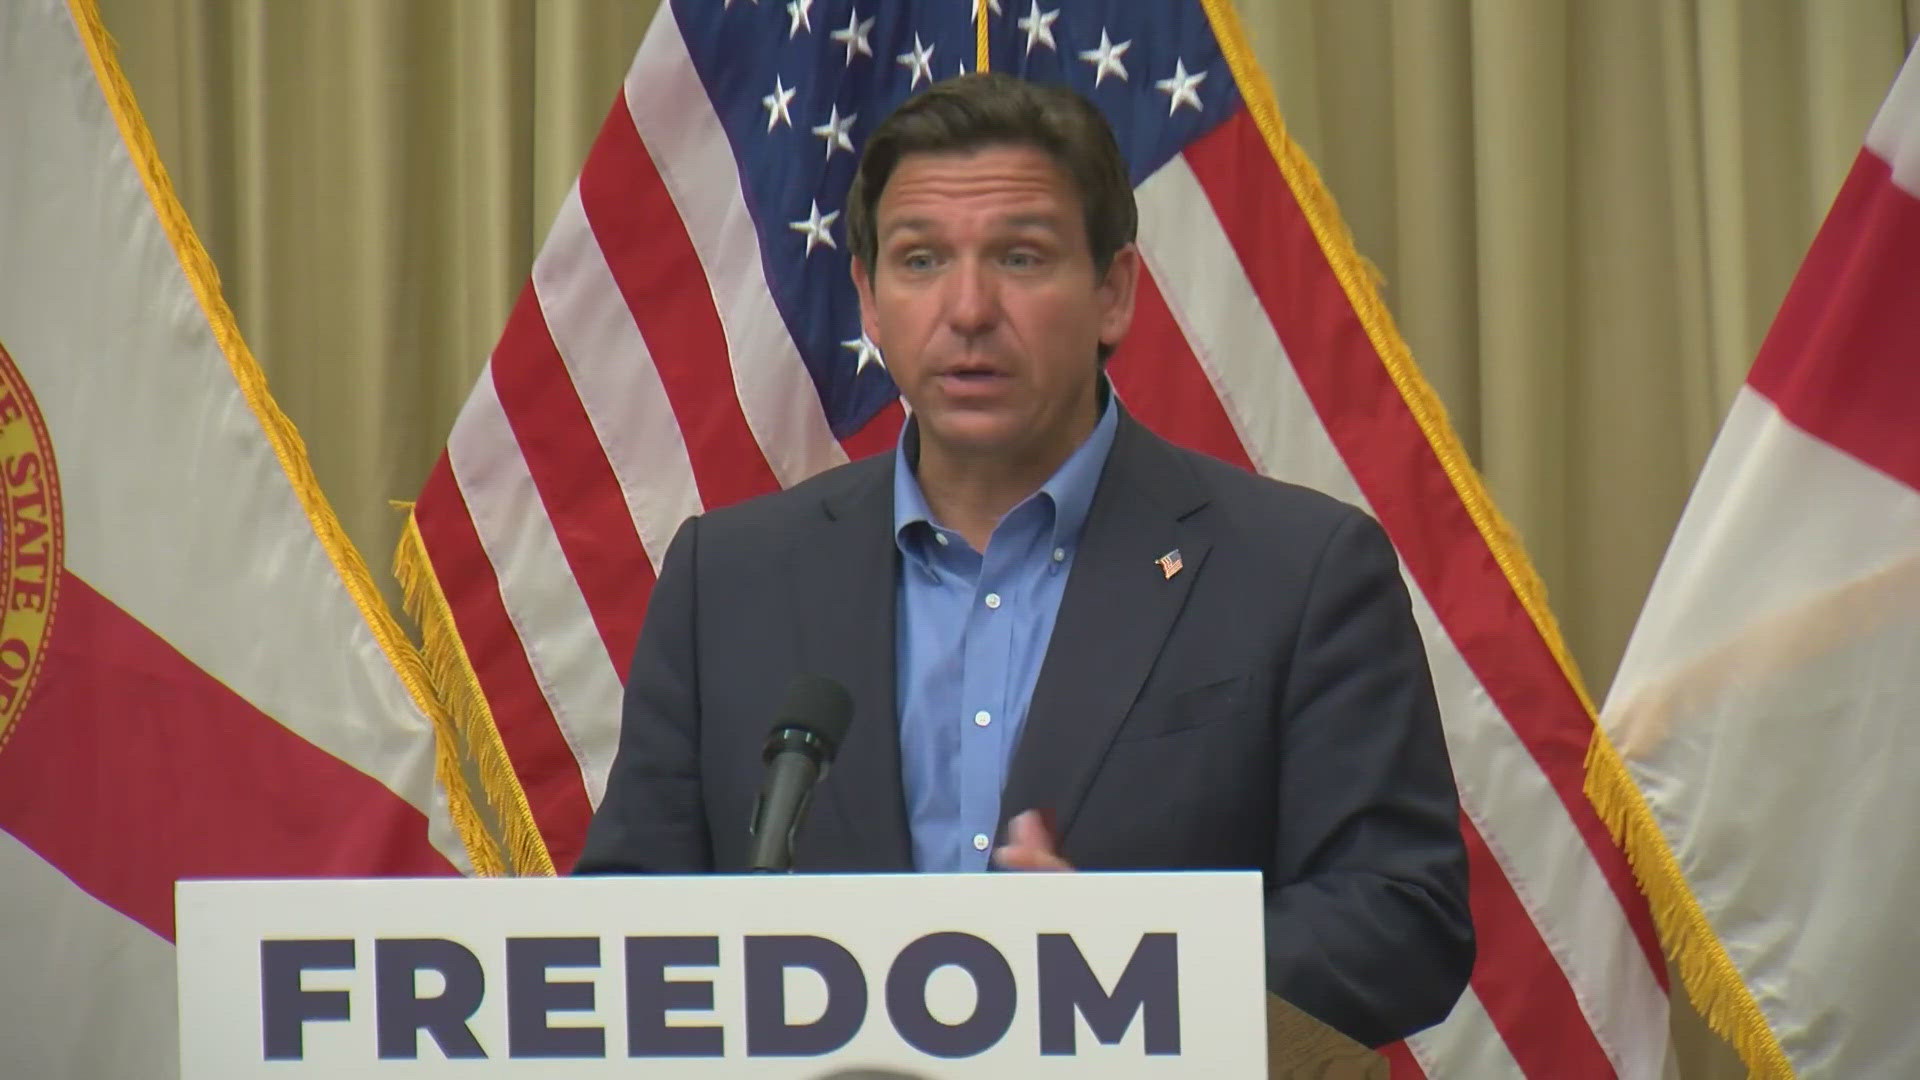 Gov. DeSantis said Floridians won't have to pay sales tax on things like fishing gear, beach supplies, festivals and more. So when does it start?